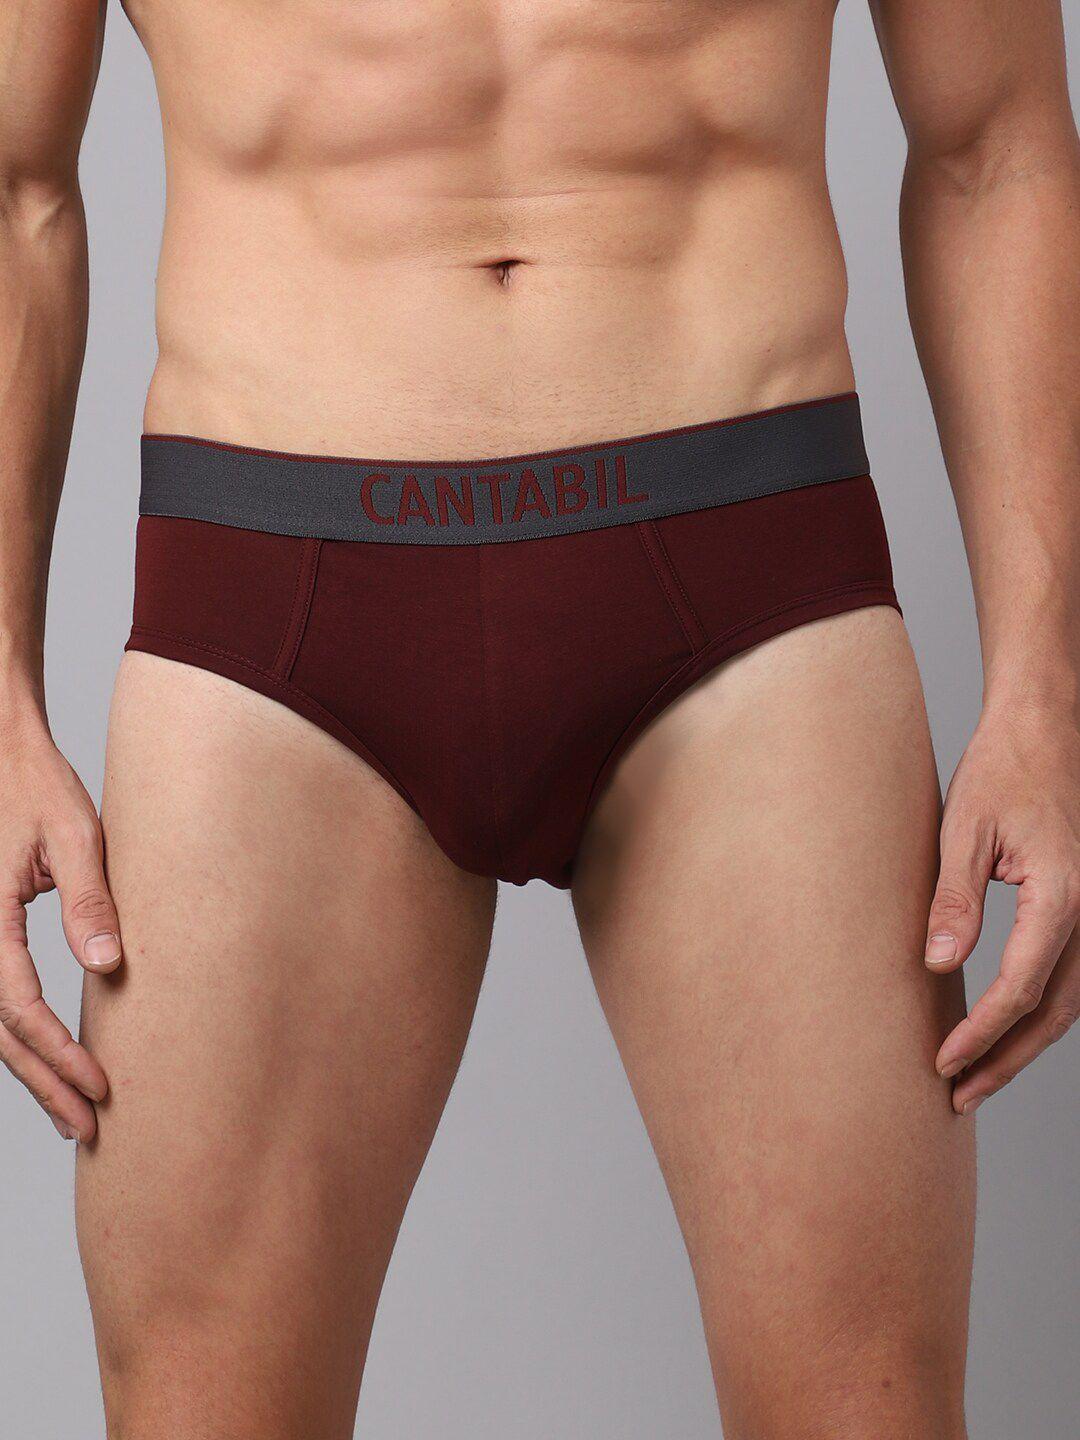 cantabil-men-set-of-2-maroon-solid-basic-cotton-briefs